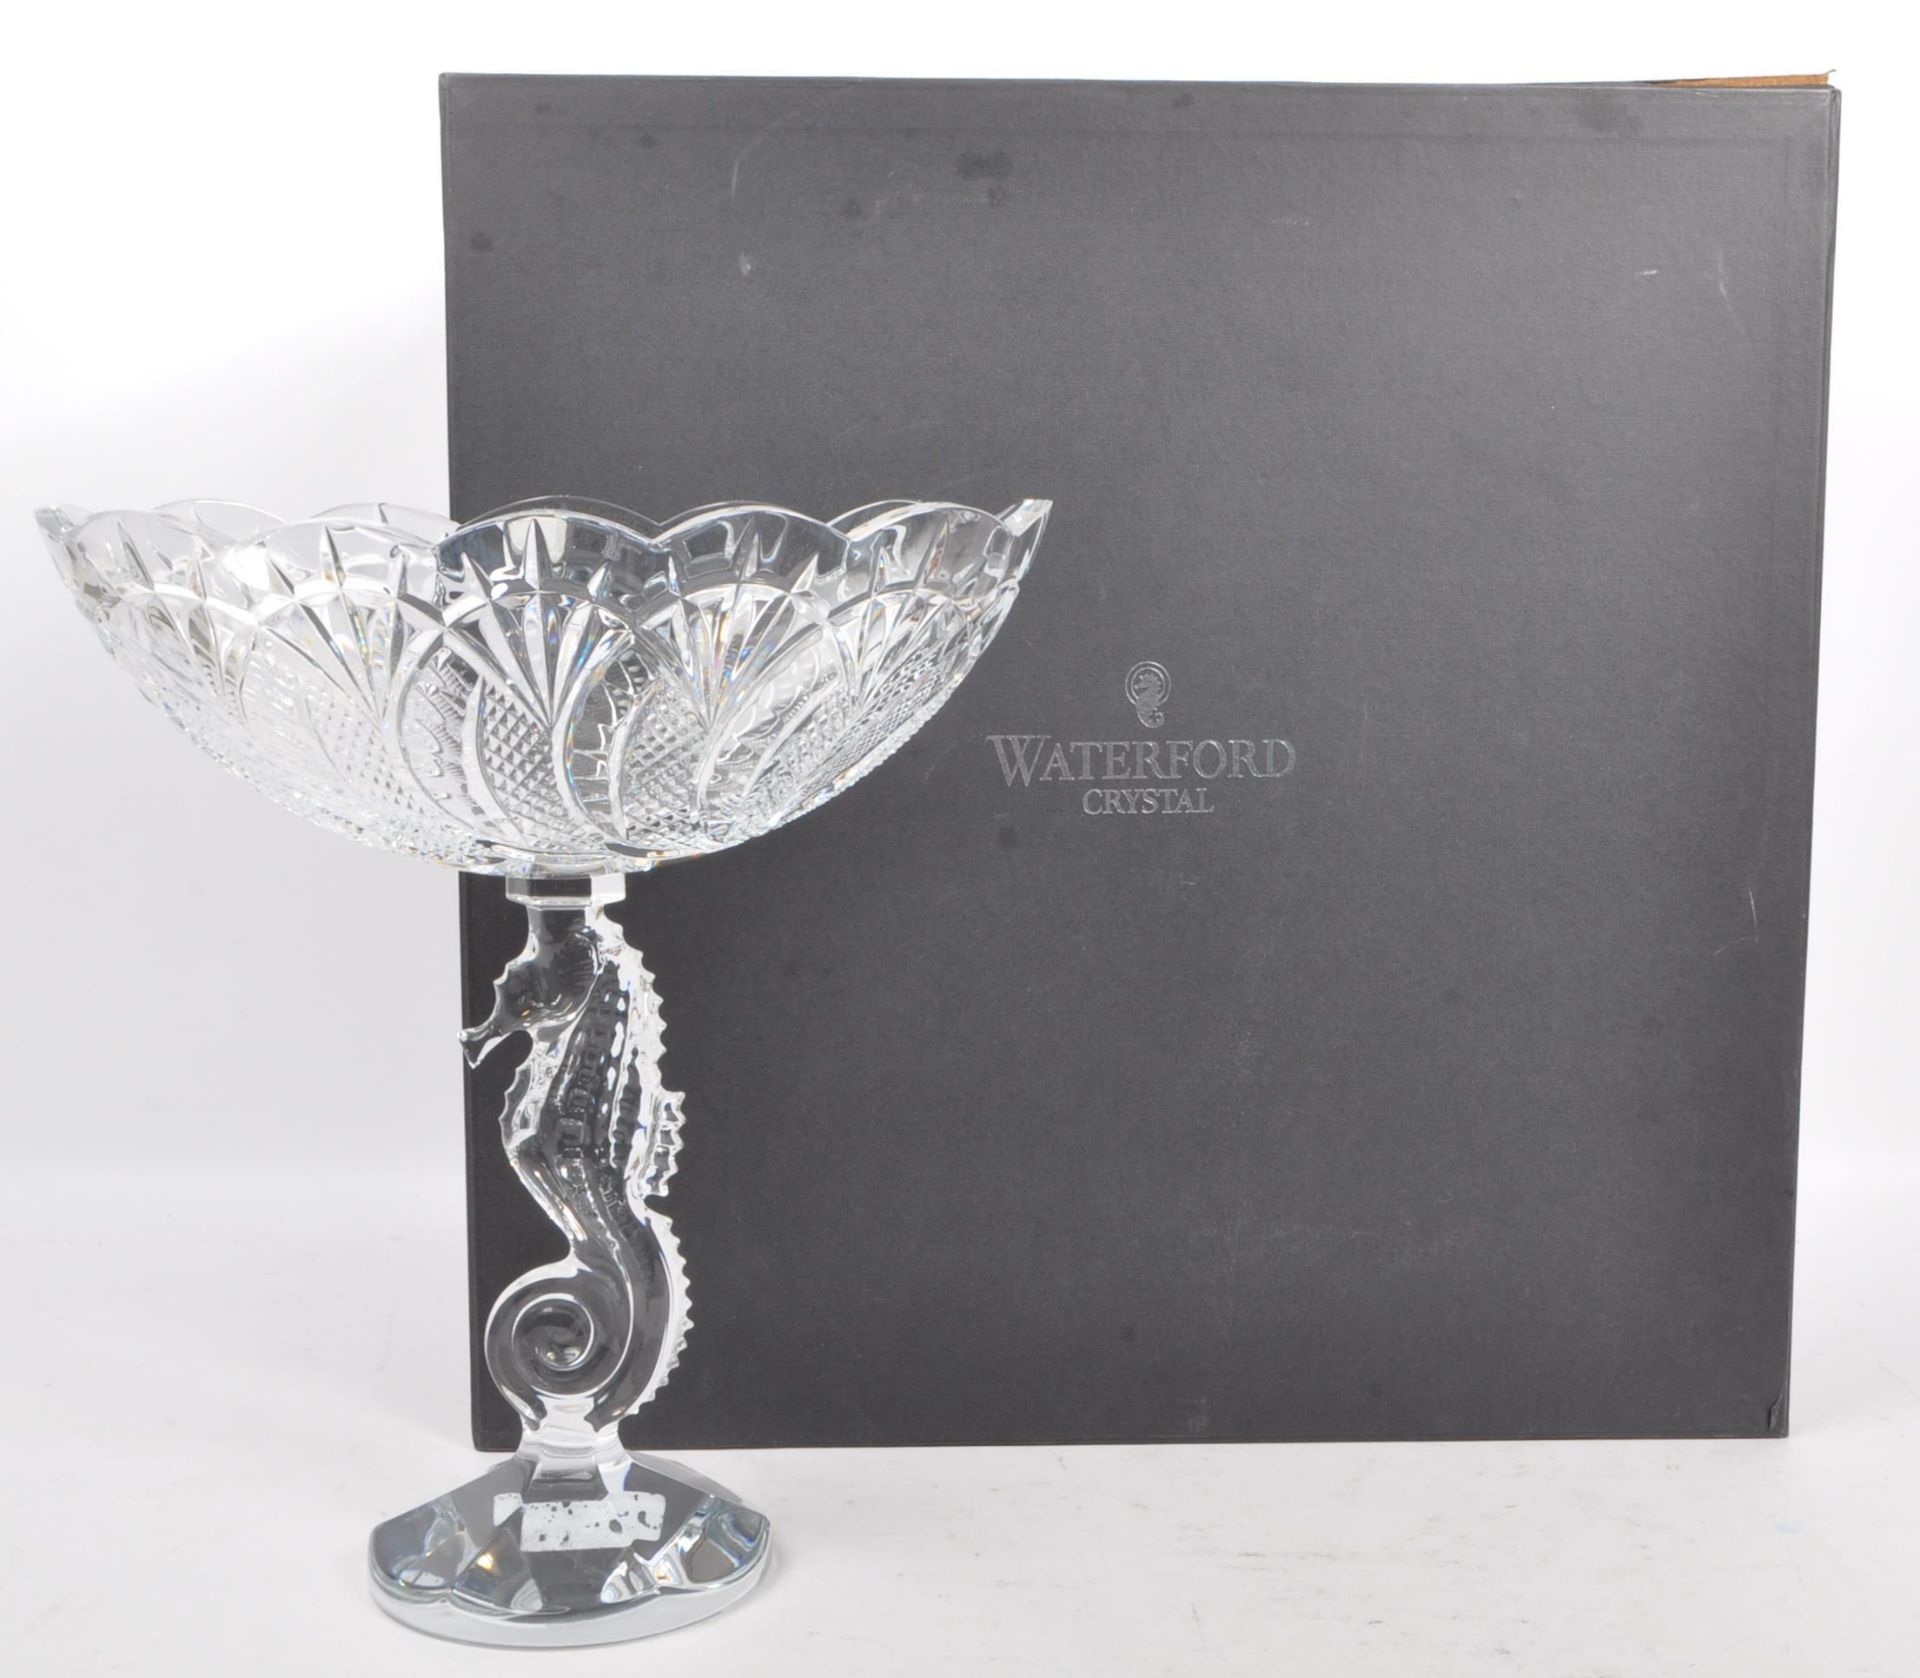 WATERFORD CRYSTAL GLASS - SEAHORSE TAZZA CENTREPIECE NOS